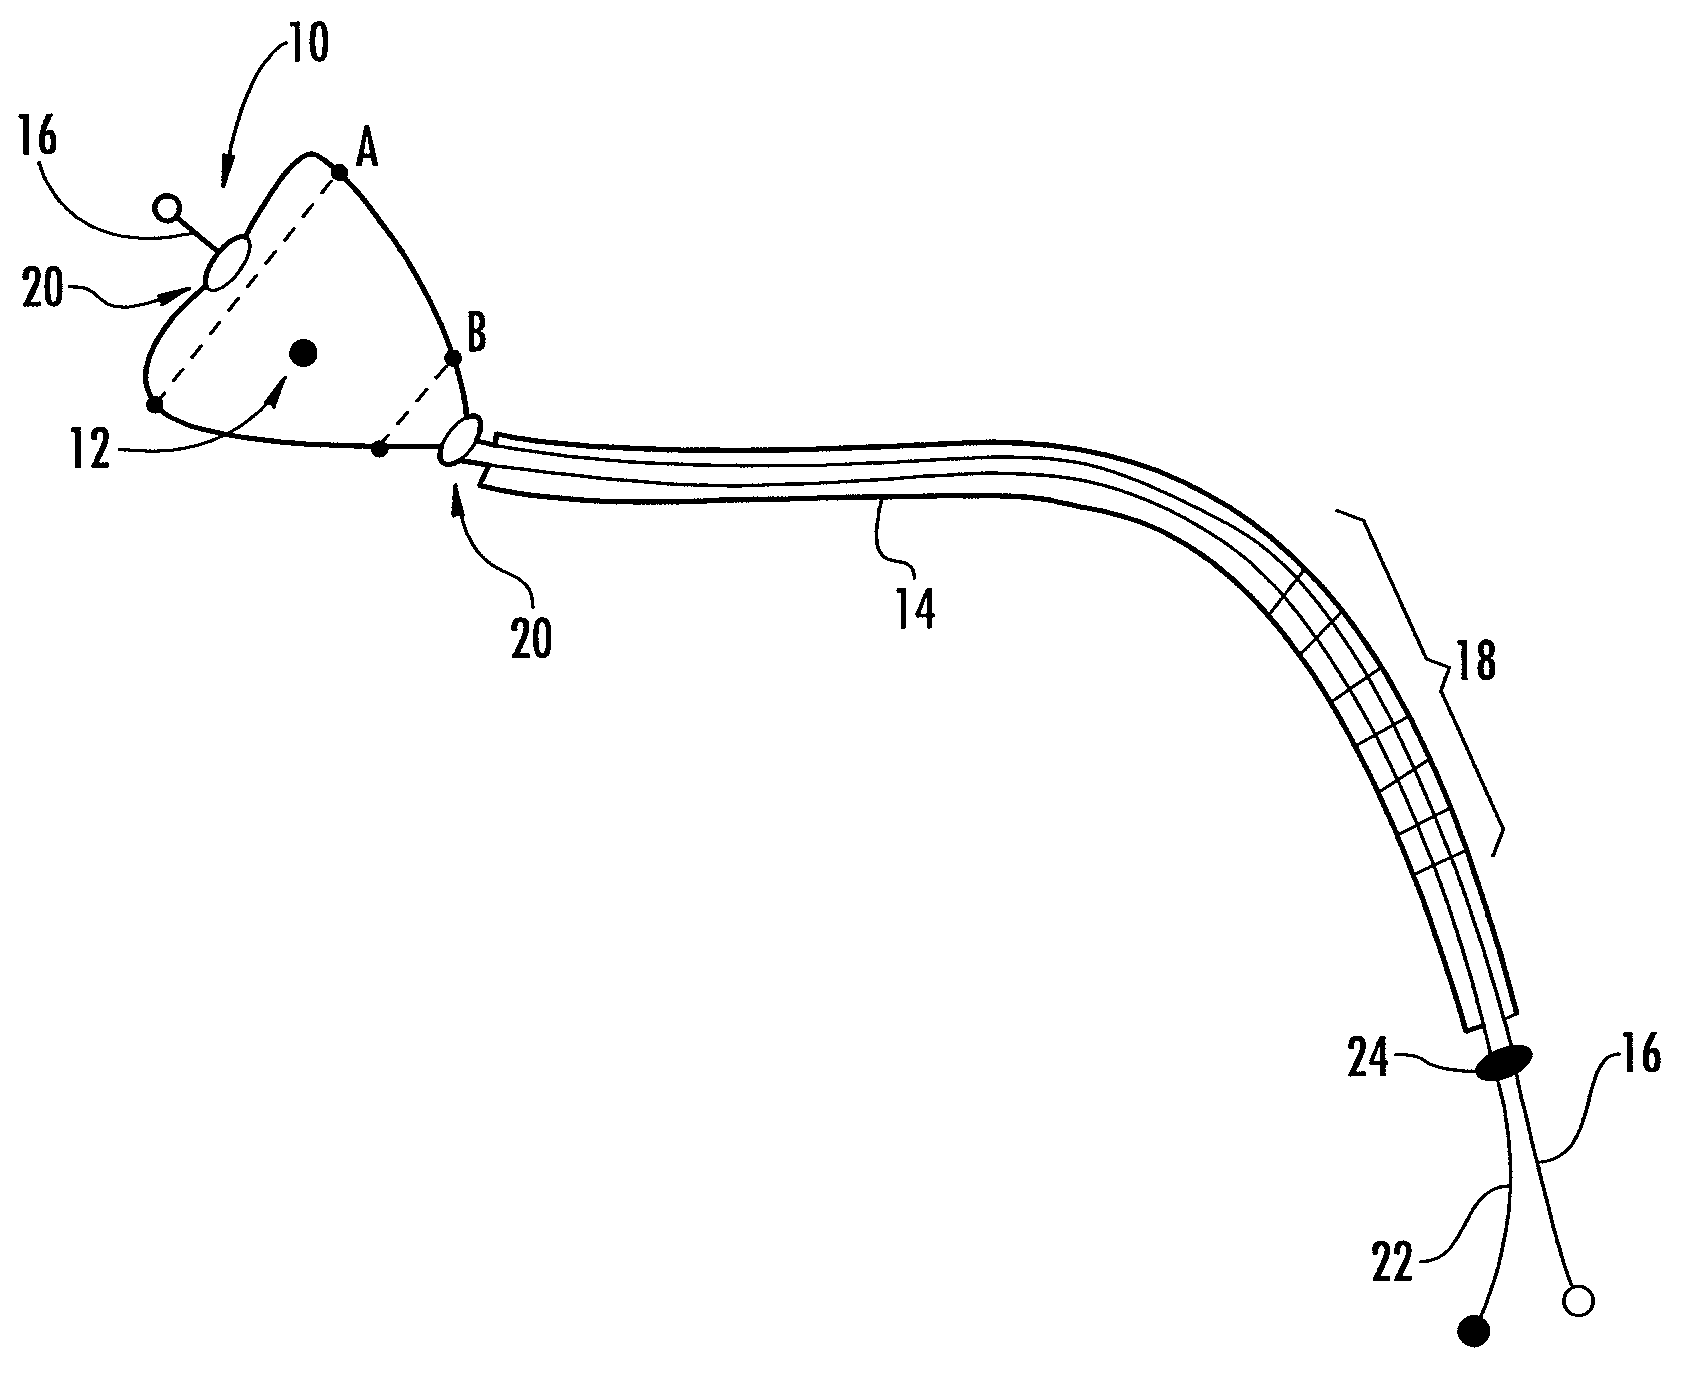 Variable occlusional balloon catheter assembly